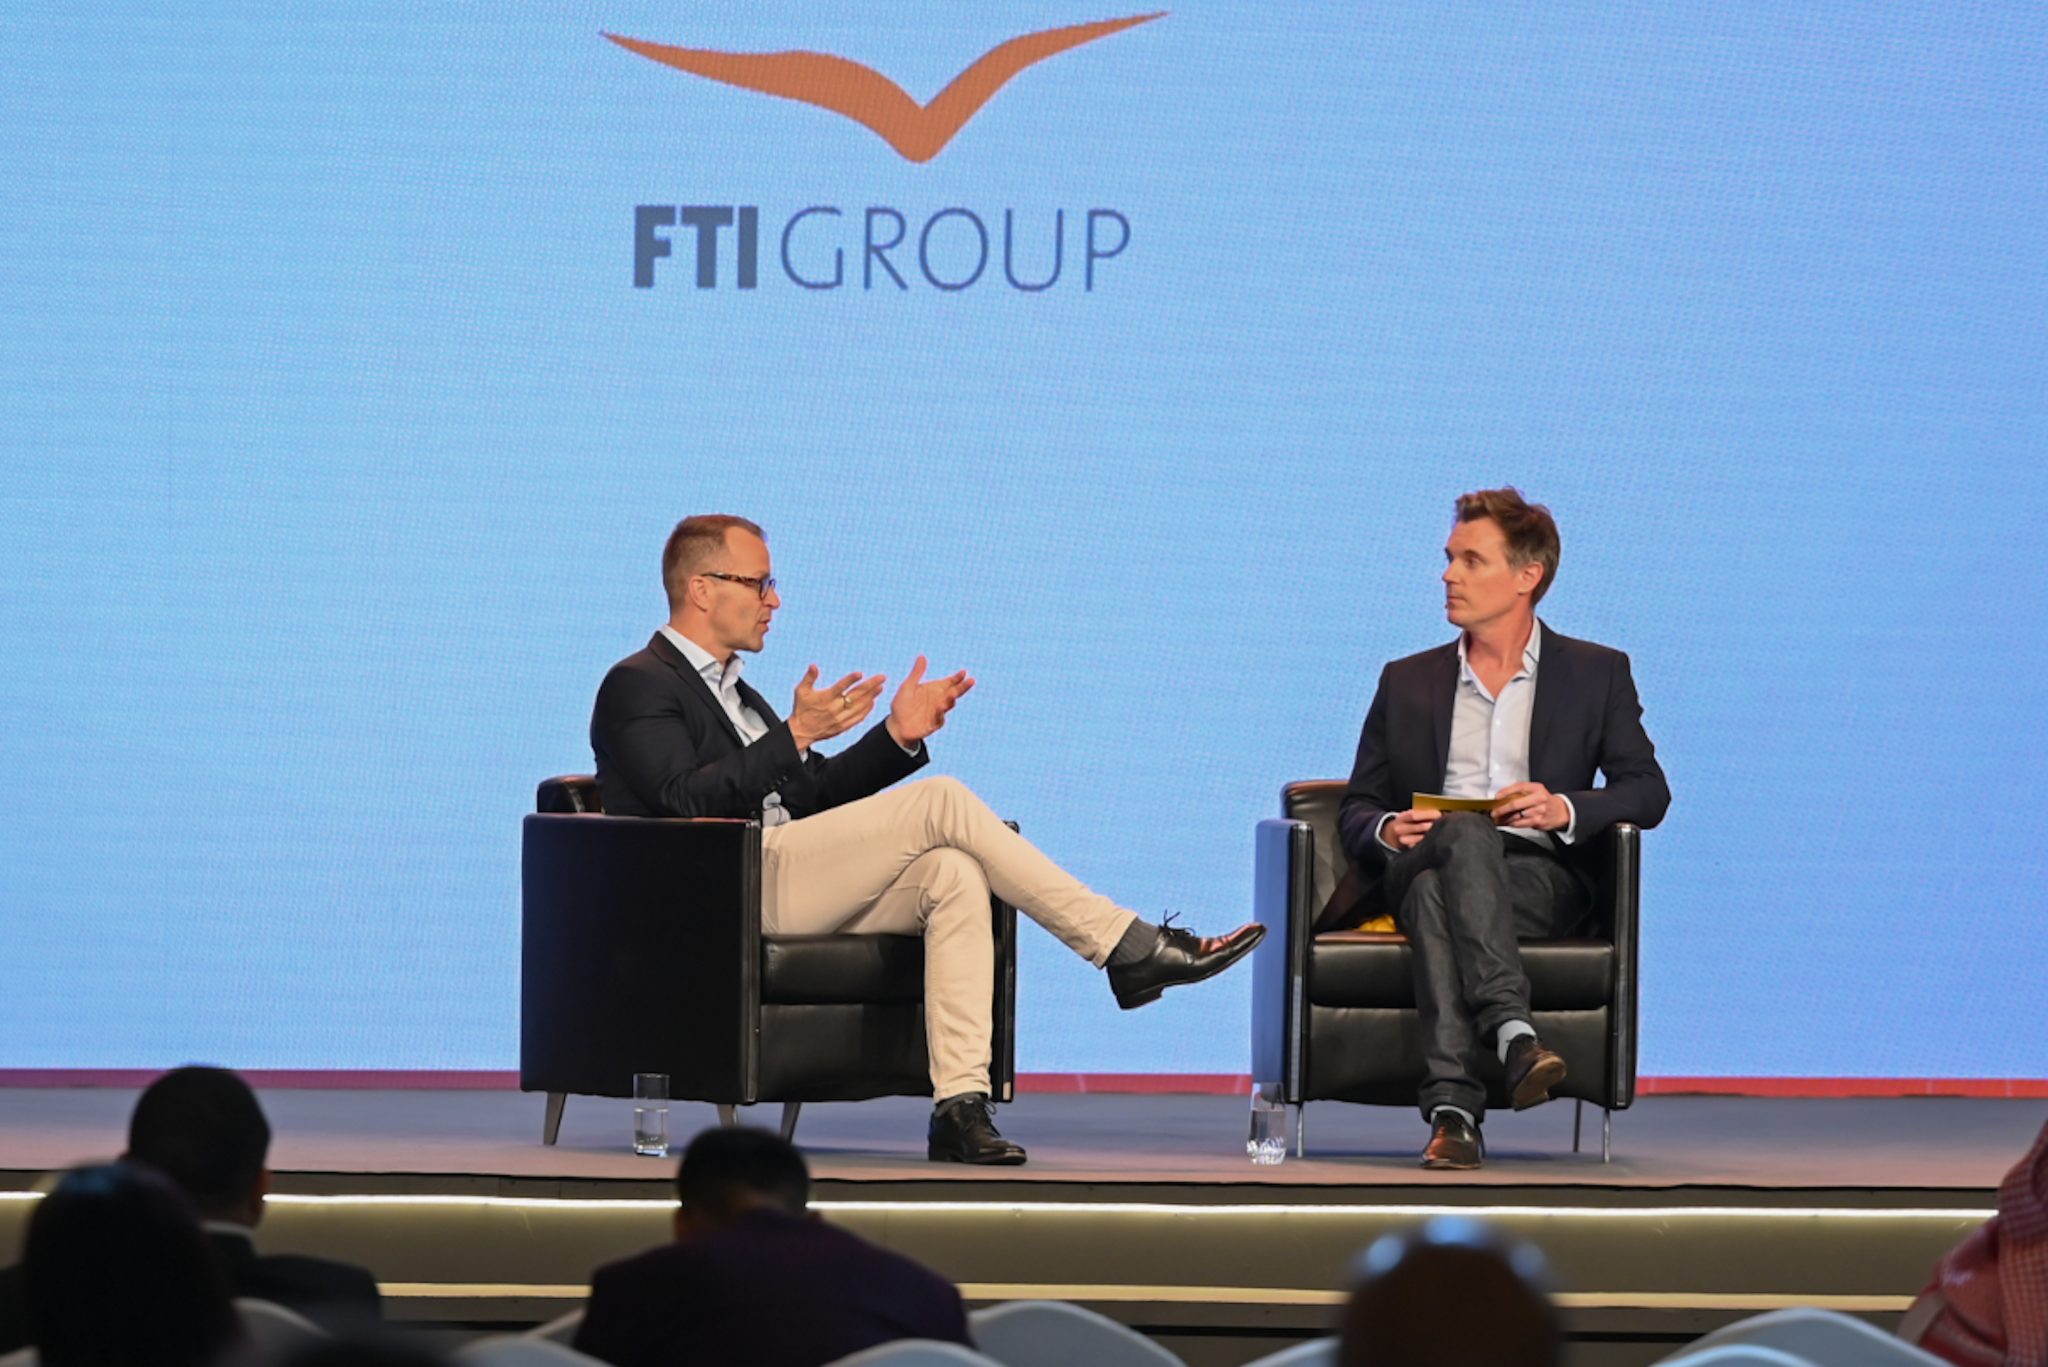 Casper Urhammer, CEO of tour operator FTI Group, on stage with Skift Corporate Travel Editor Matthew Parsons at Skift Global Forum East in Dubai Skift